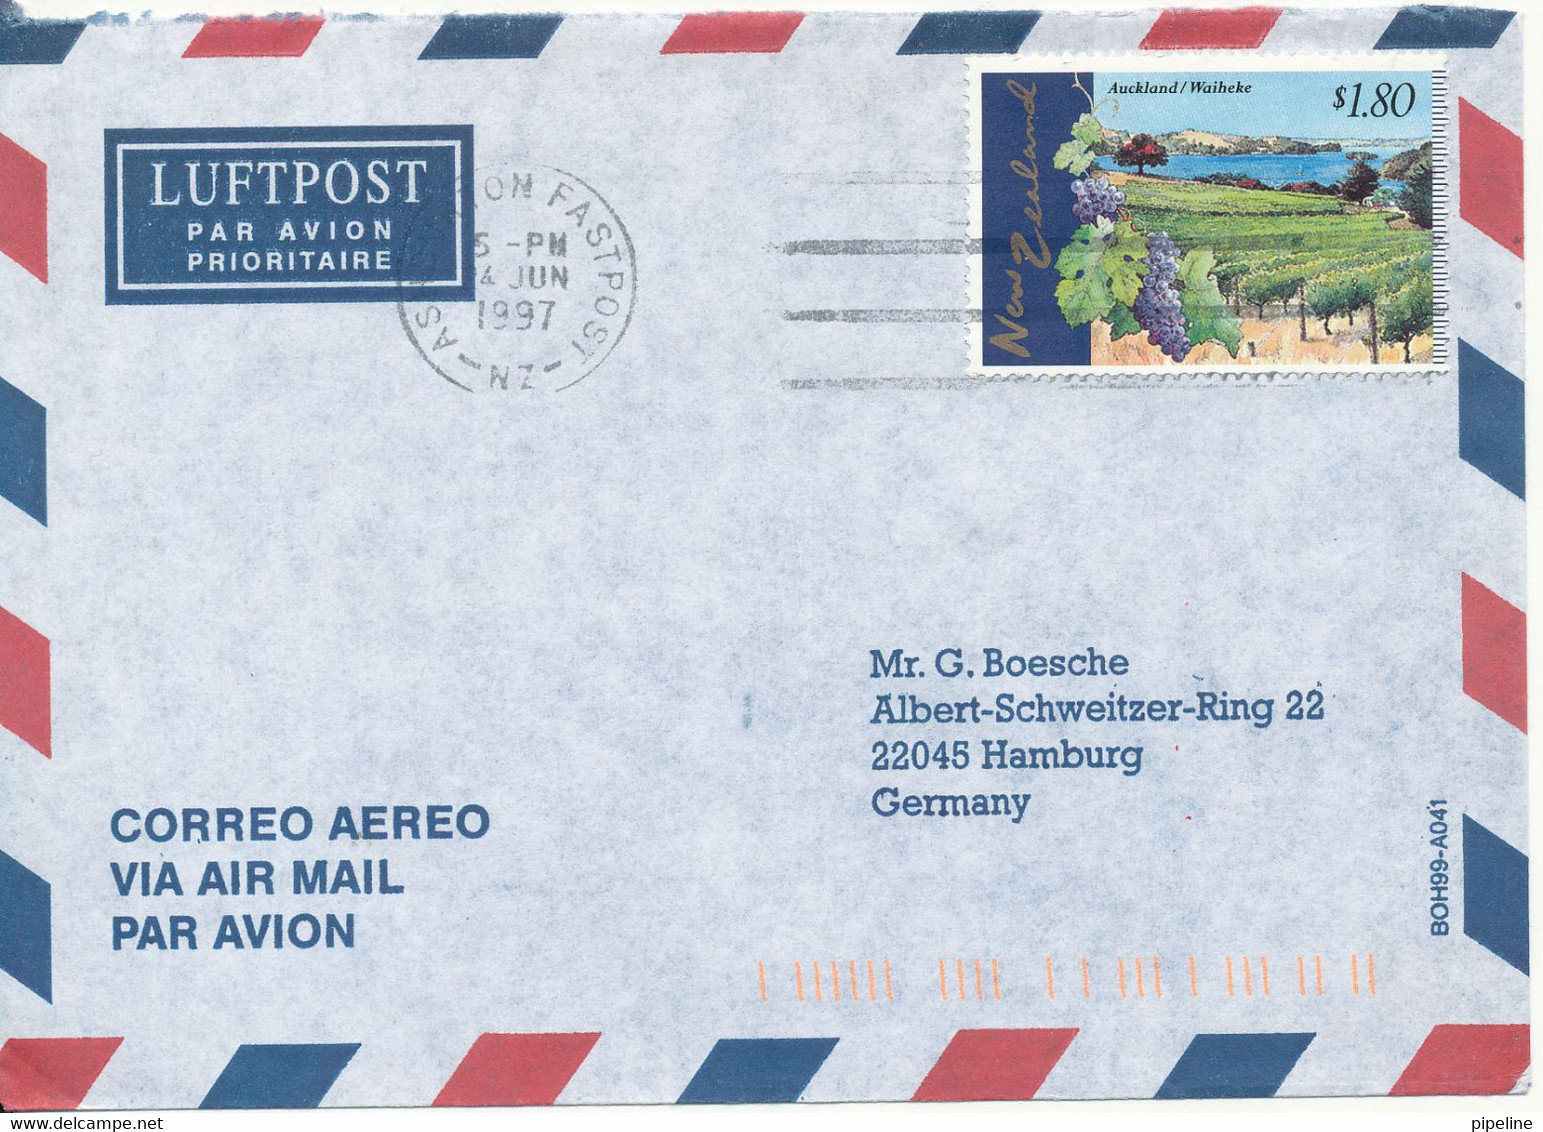 New Zealand Air Mail Cover Sent To Germany 24-6-1997 Single Franked - Corréo Aéreo